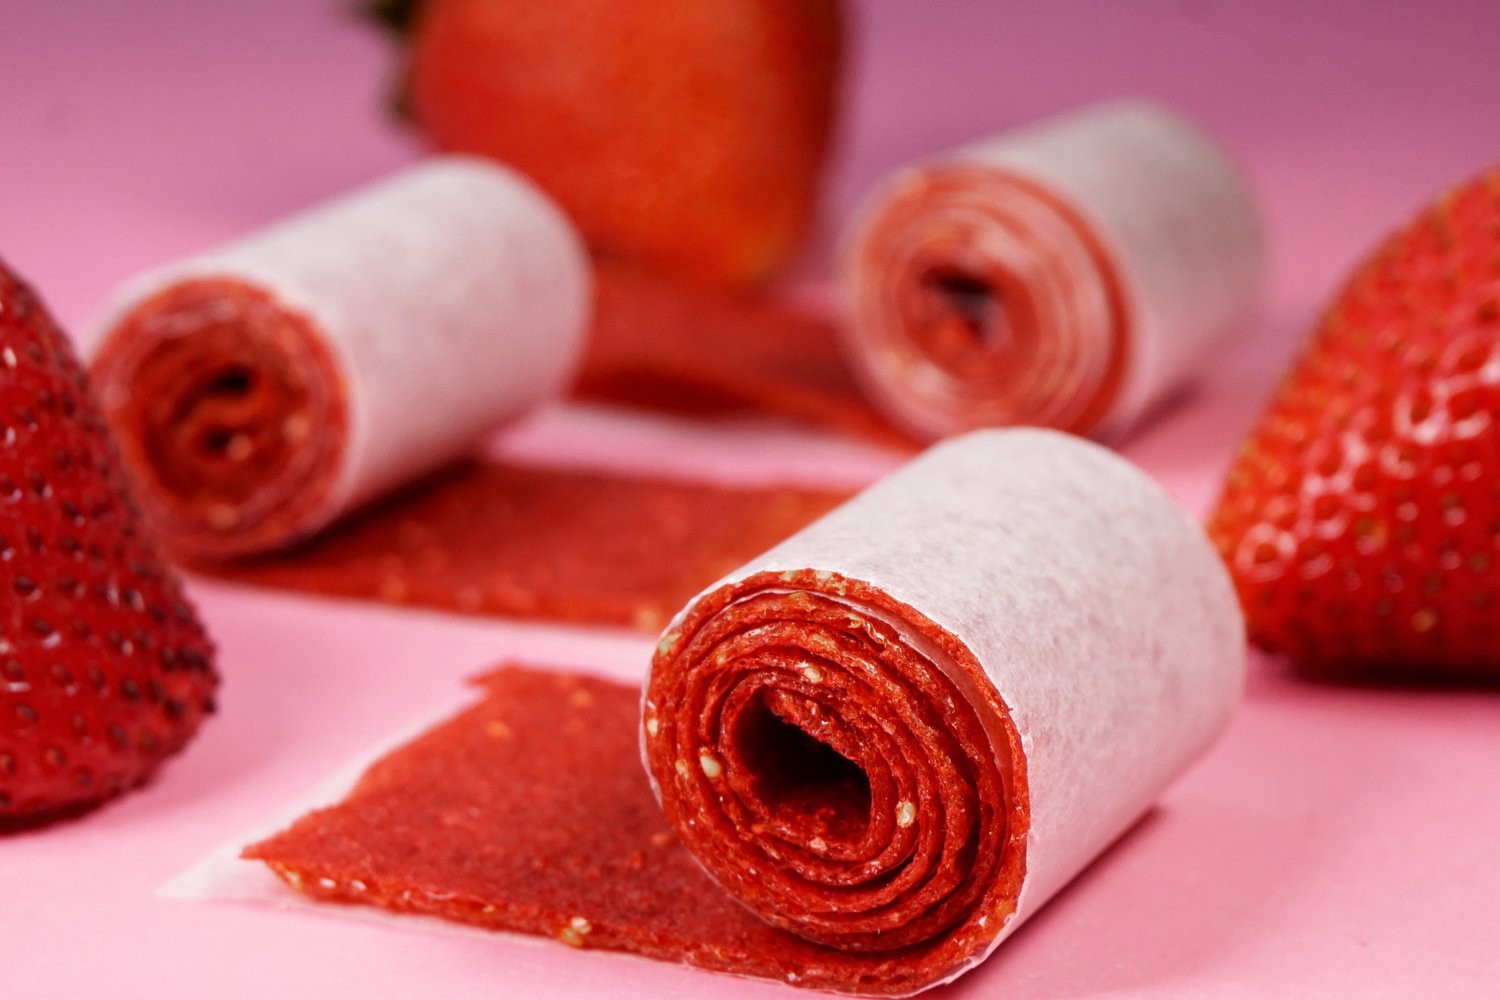 15-fruit-roll-ups-nutrition-facts